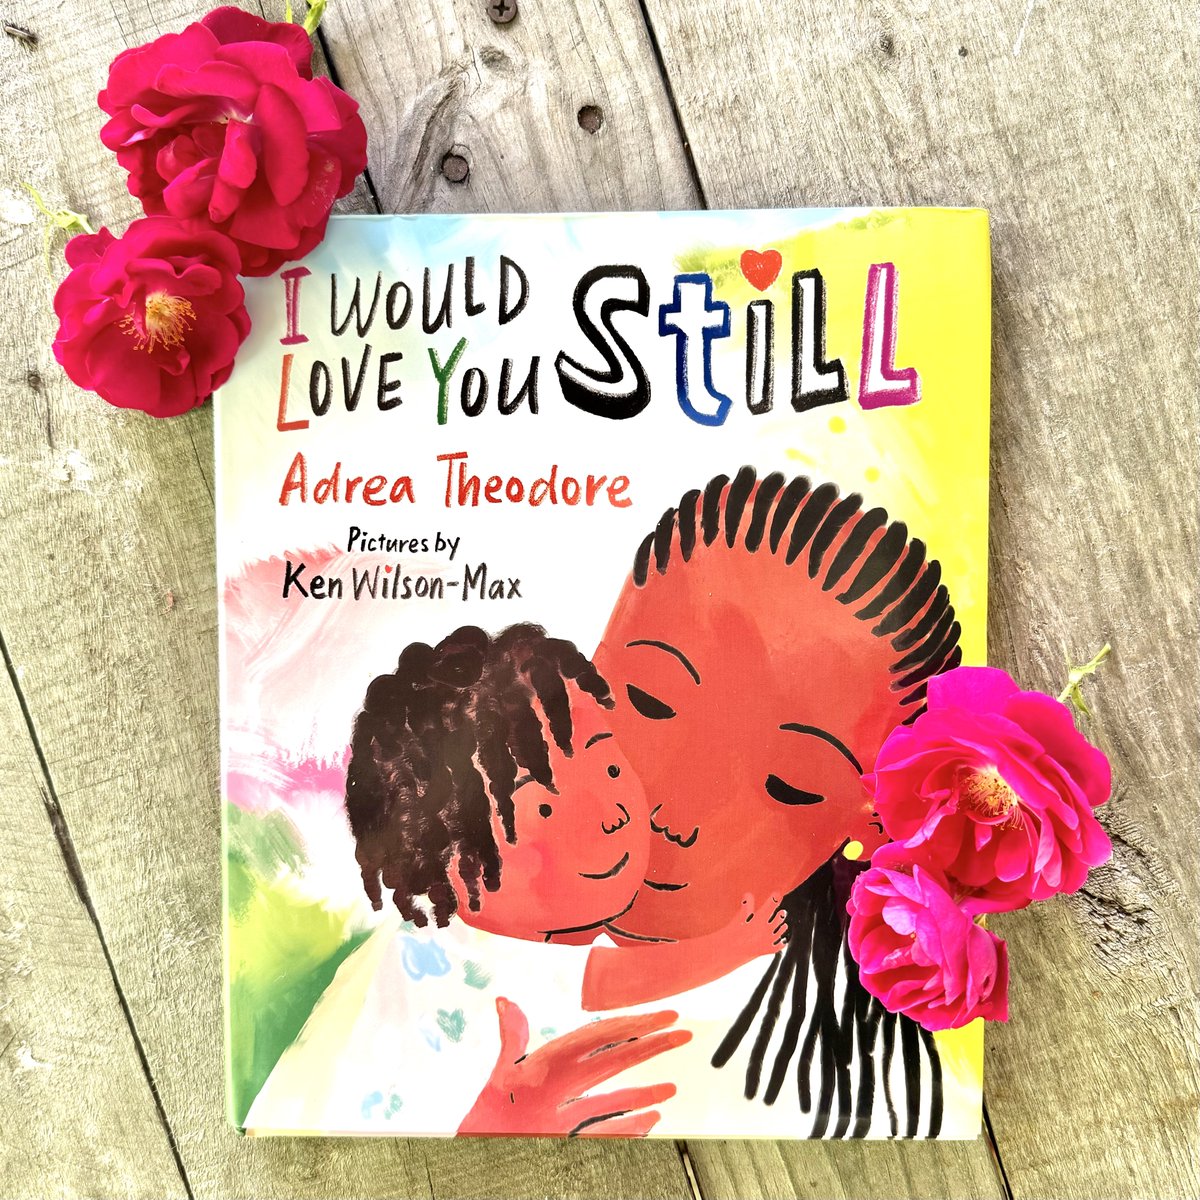 Mother's Day is next Sunday, and we have the perfect book to help you celebrate! I WOULD LOVE YOU STILL is on shelves now! @adrea_theodore ow.ly/SILQ50Rv8jF #picturebook